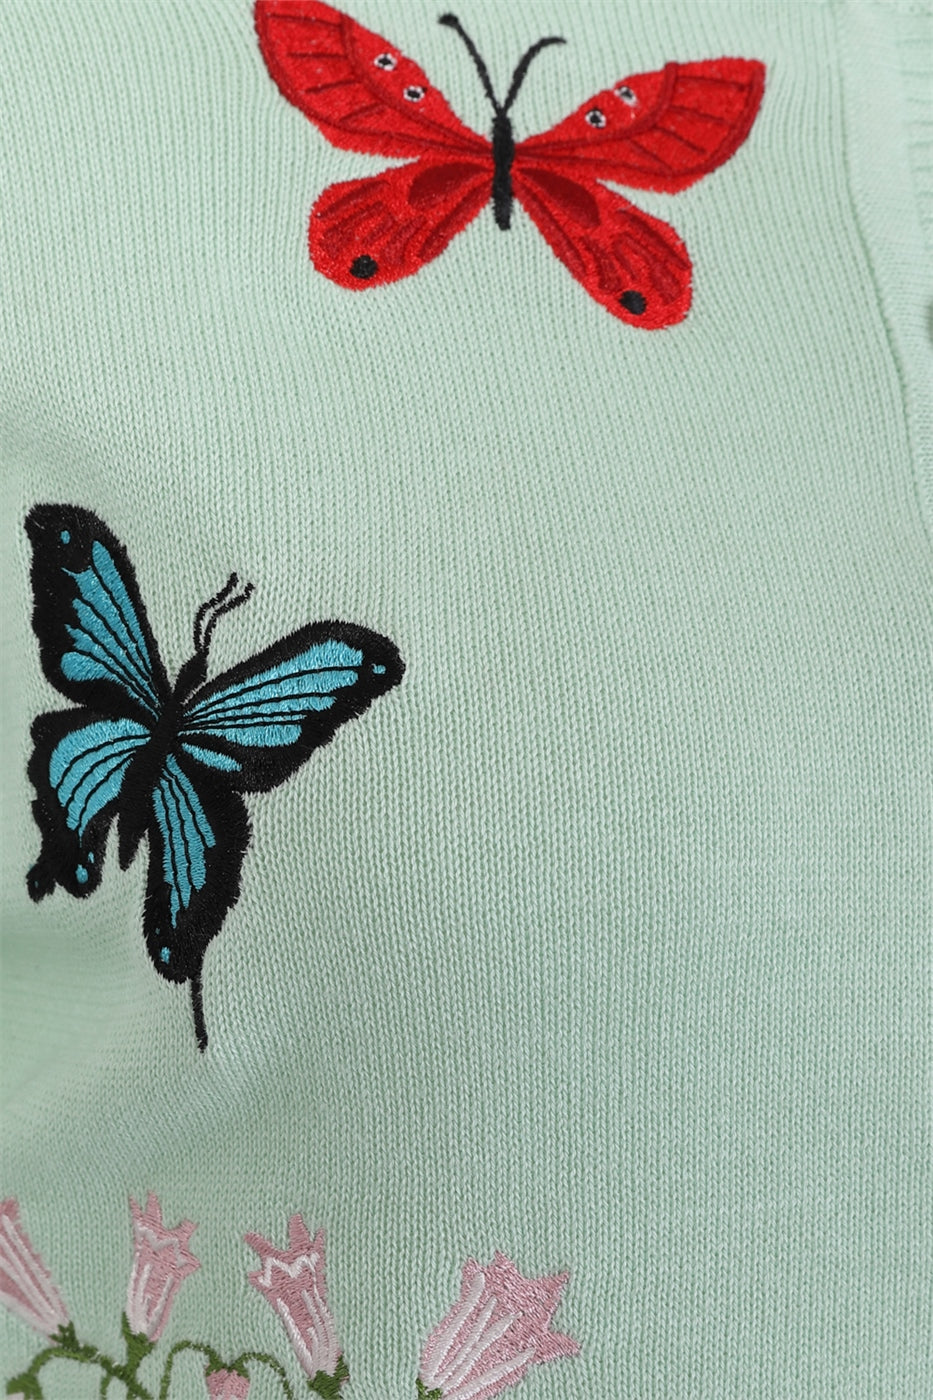 Close up of a blue and black embroidered butterfly and a red embroidered butterfly flying above some pink embroidered flowers with green stems.